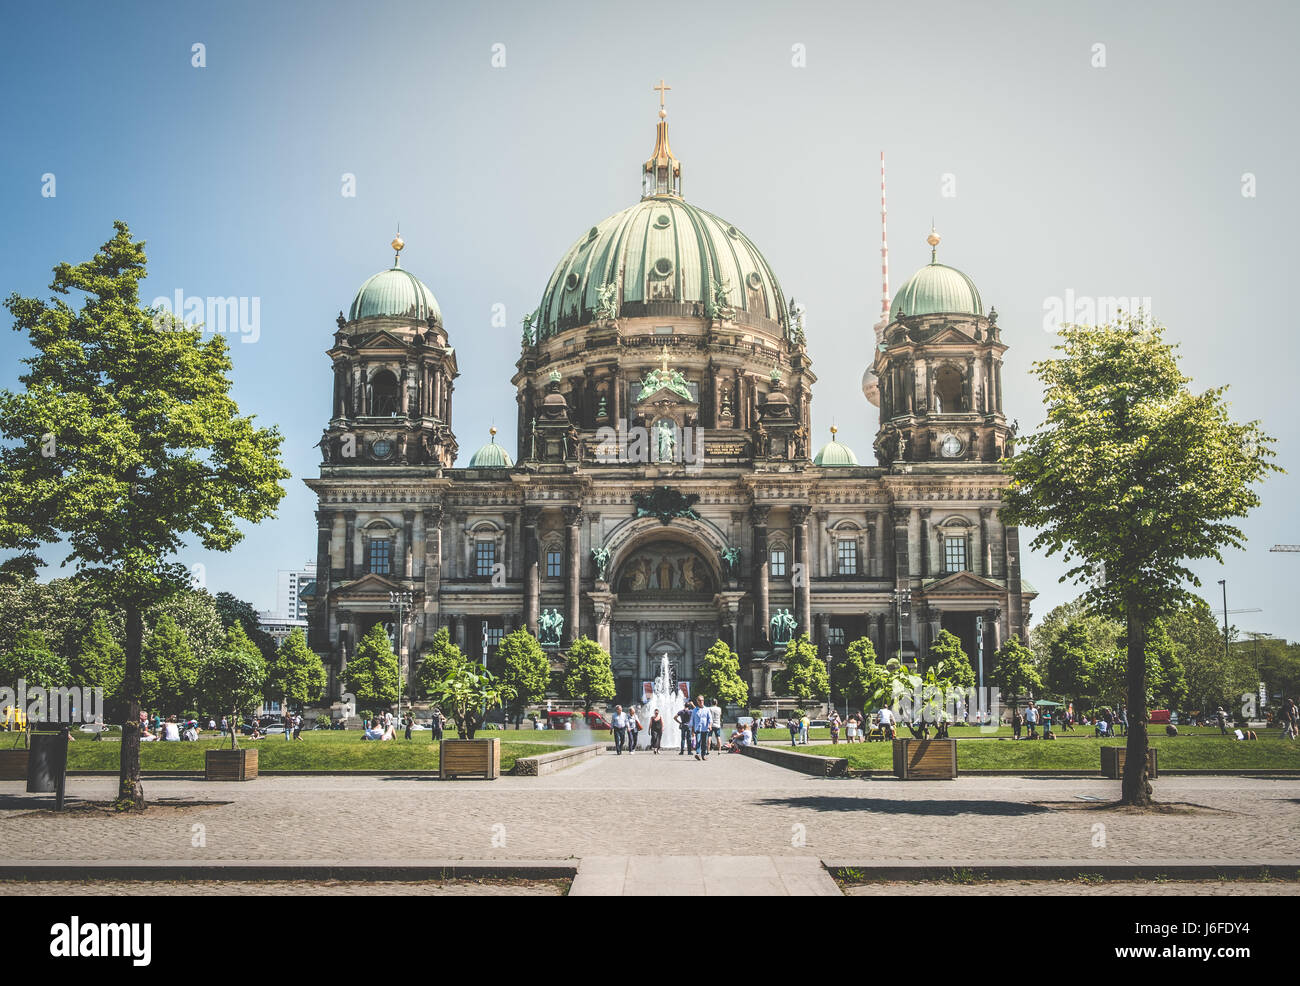 Berlin, Germany - may 19, 2017: The Berlin cathedral (Berliner Dom) in Berlin, Germany. Stock Photo